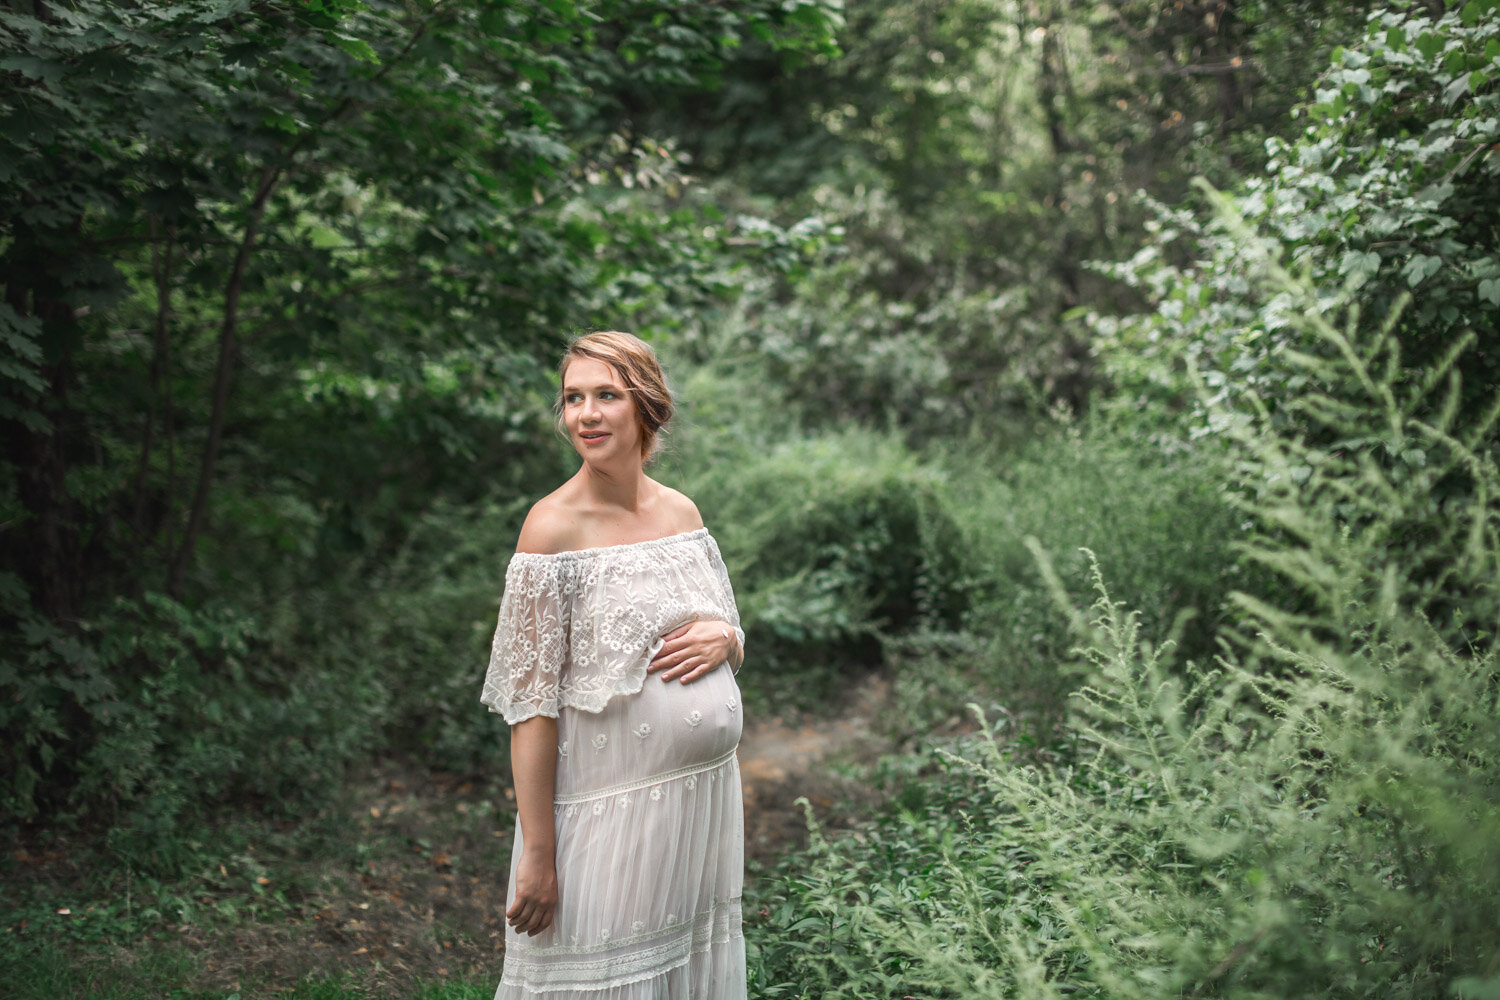 Central_Park_Maternity_Session_with_NYC_Baby_Photographer_Nicole_Hawkins_Photography_September_2019_Lara-3.jpg